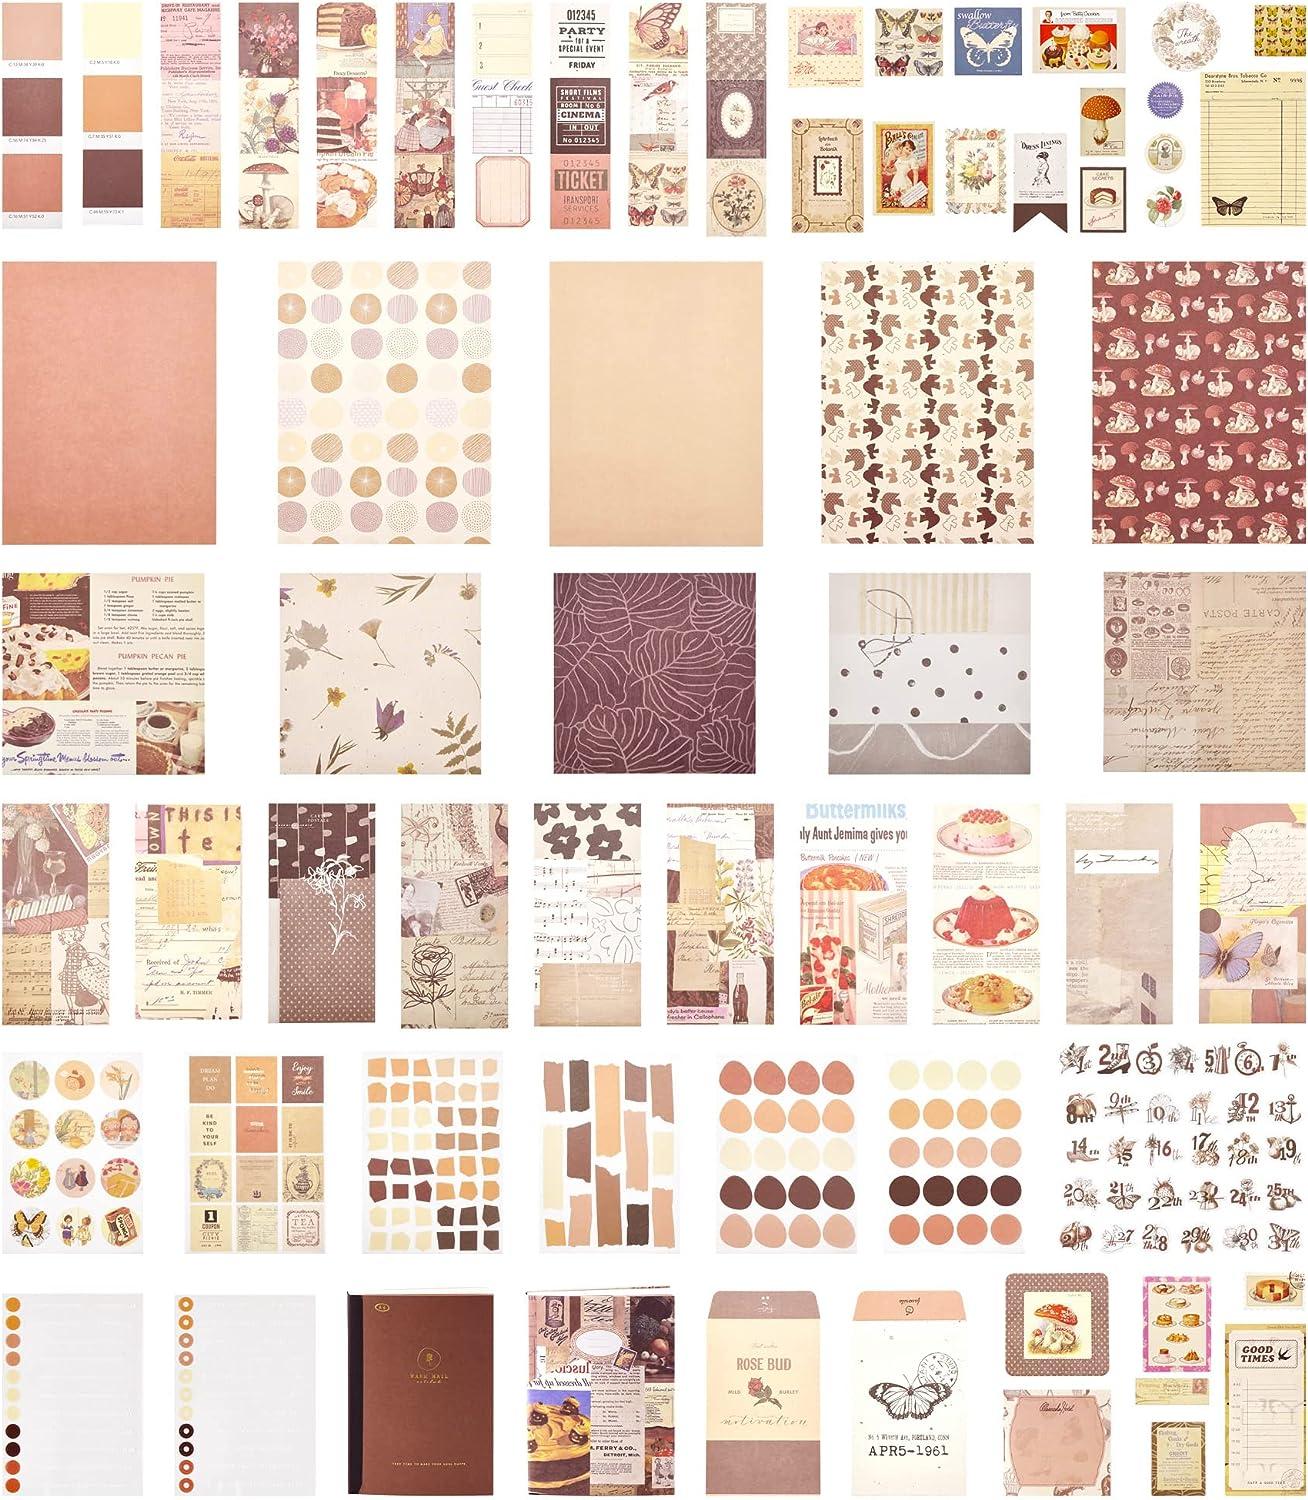 346pcs DIY Gift Vintage Aesthetic Scrapbook Kit, Bullet Junk Journal Kit  with Journaling/Scrapbooking Supplies, Stationery, A6 Grid Notebook with  Graph Ruled Pages 